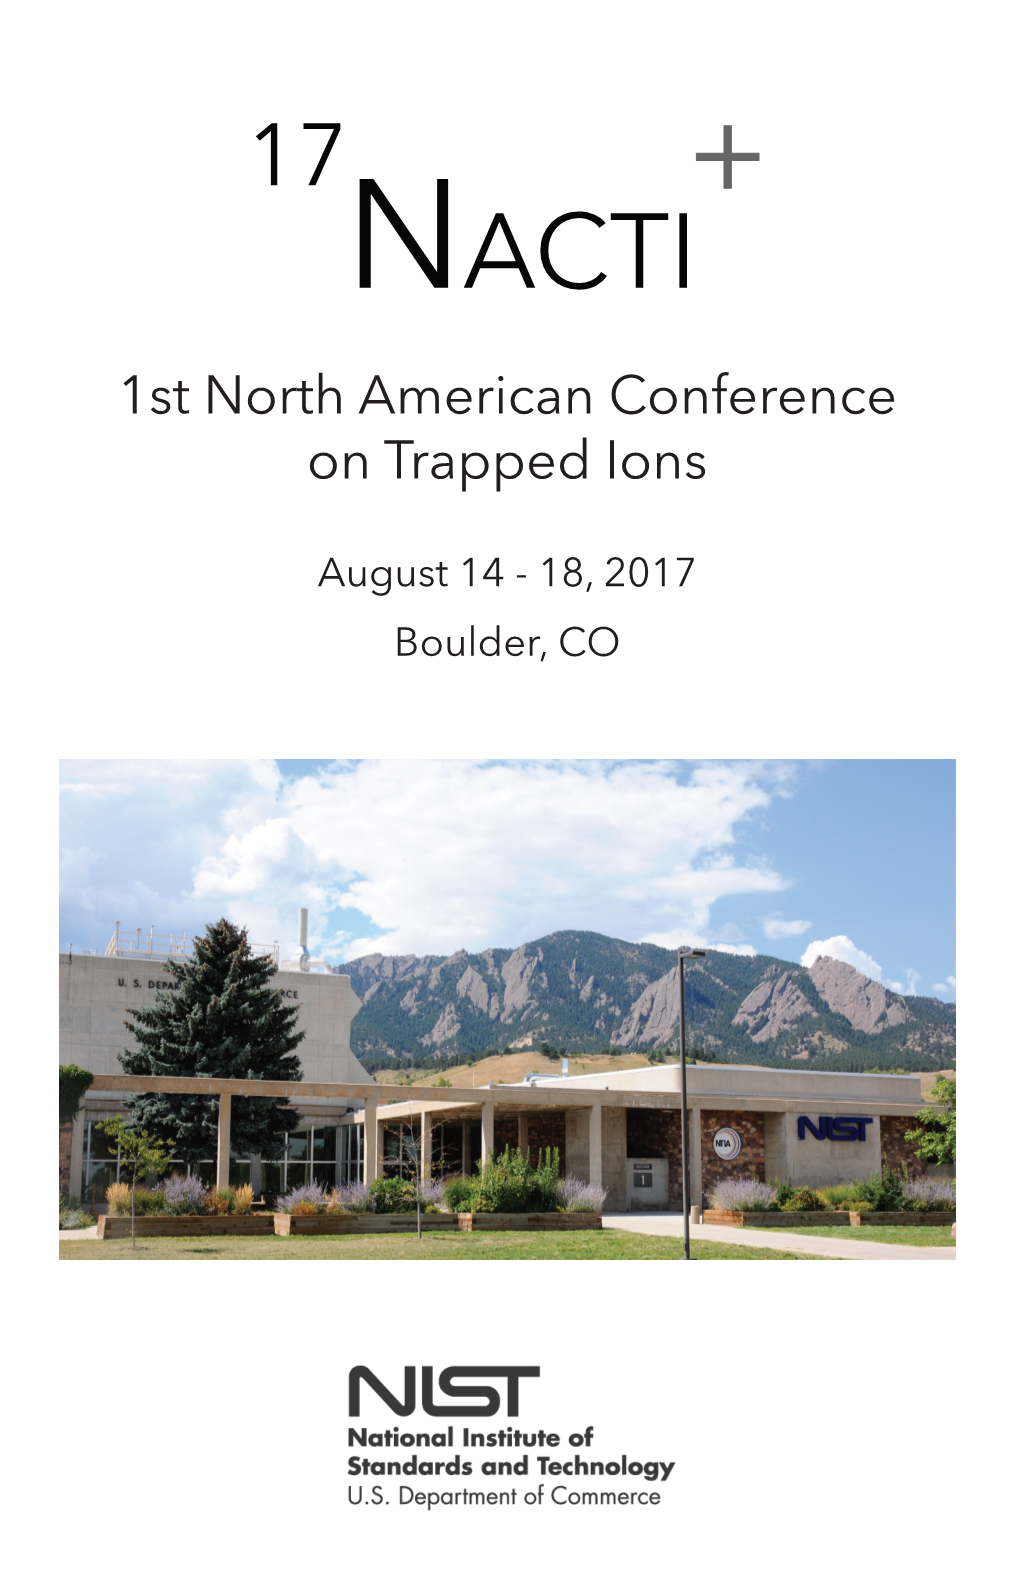 1St North American Conference on Trapped Ions (NACTI)